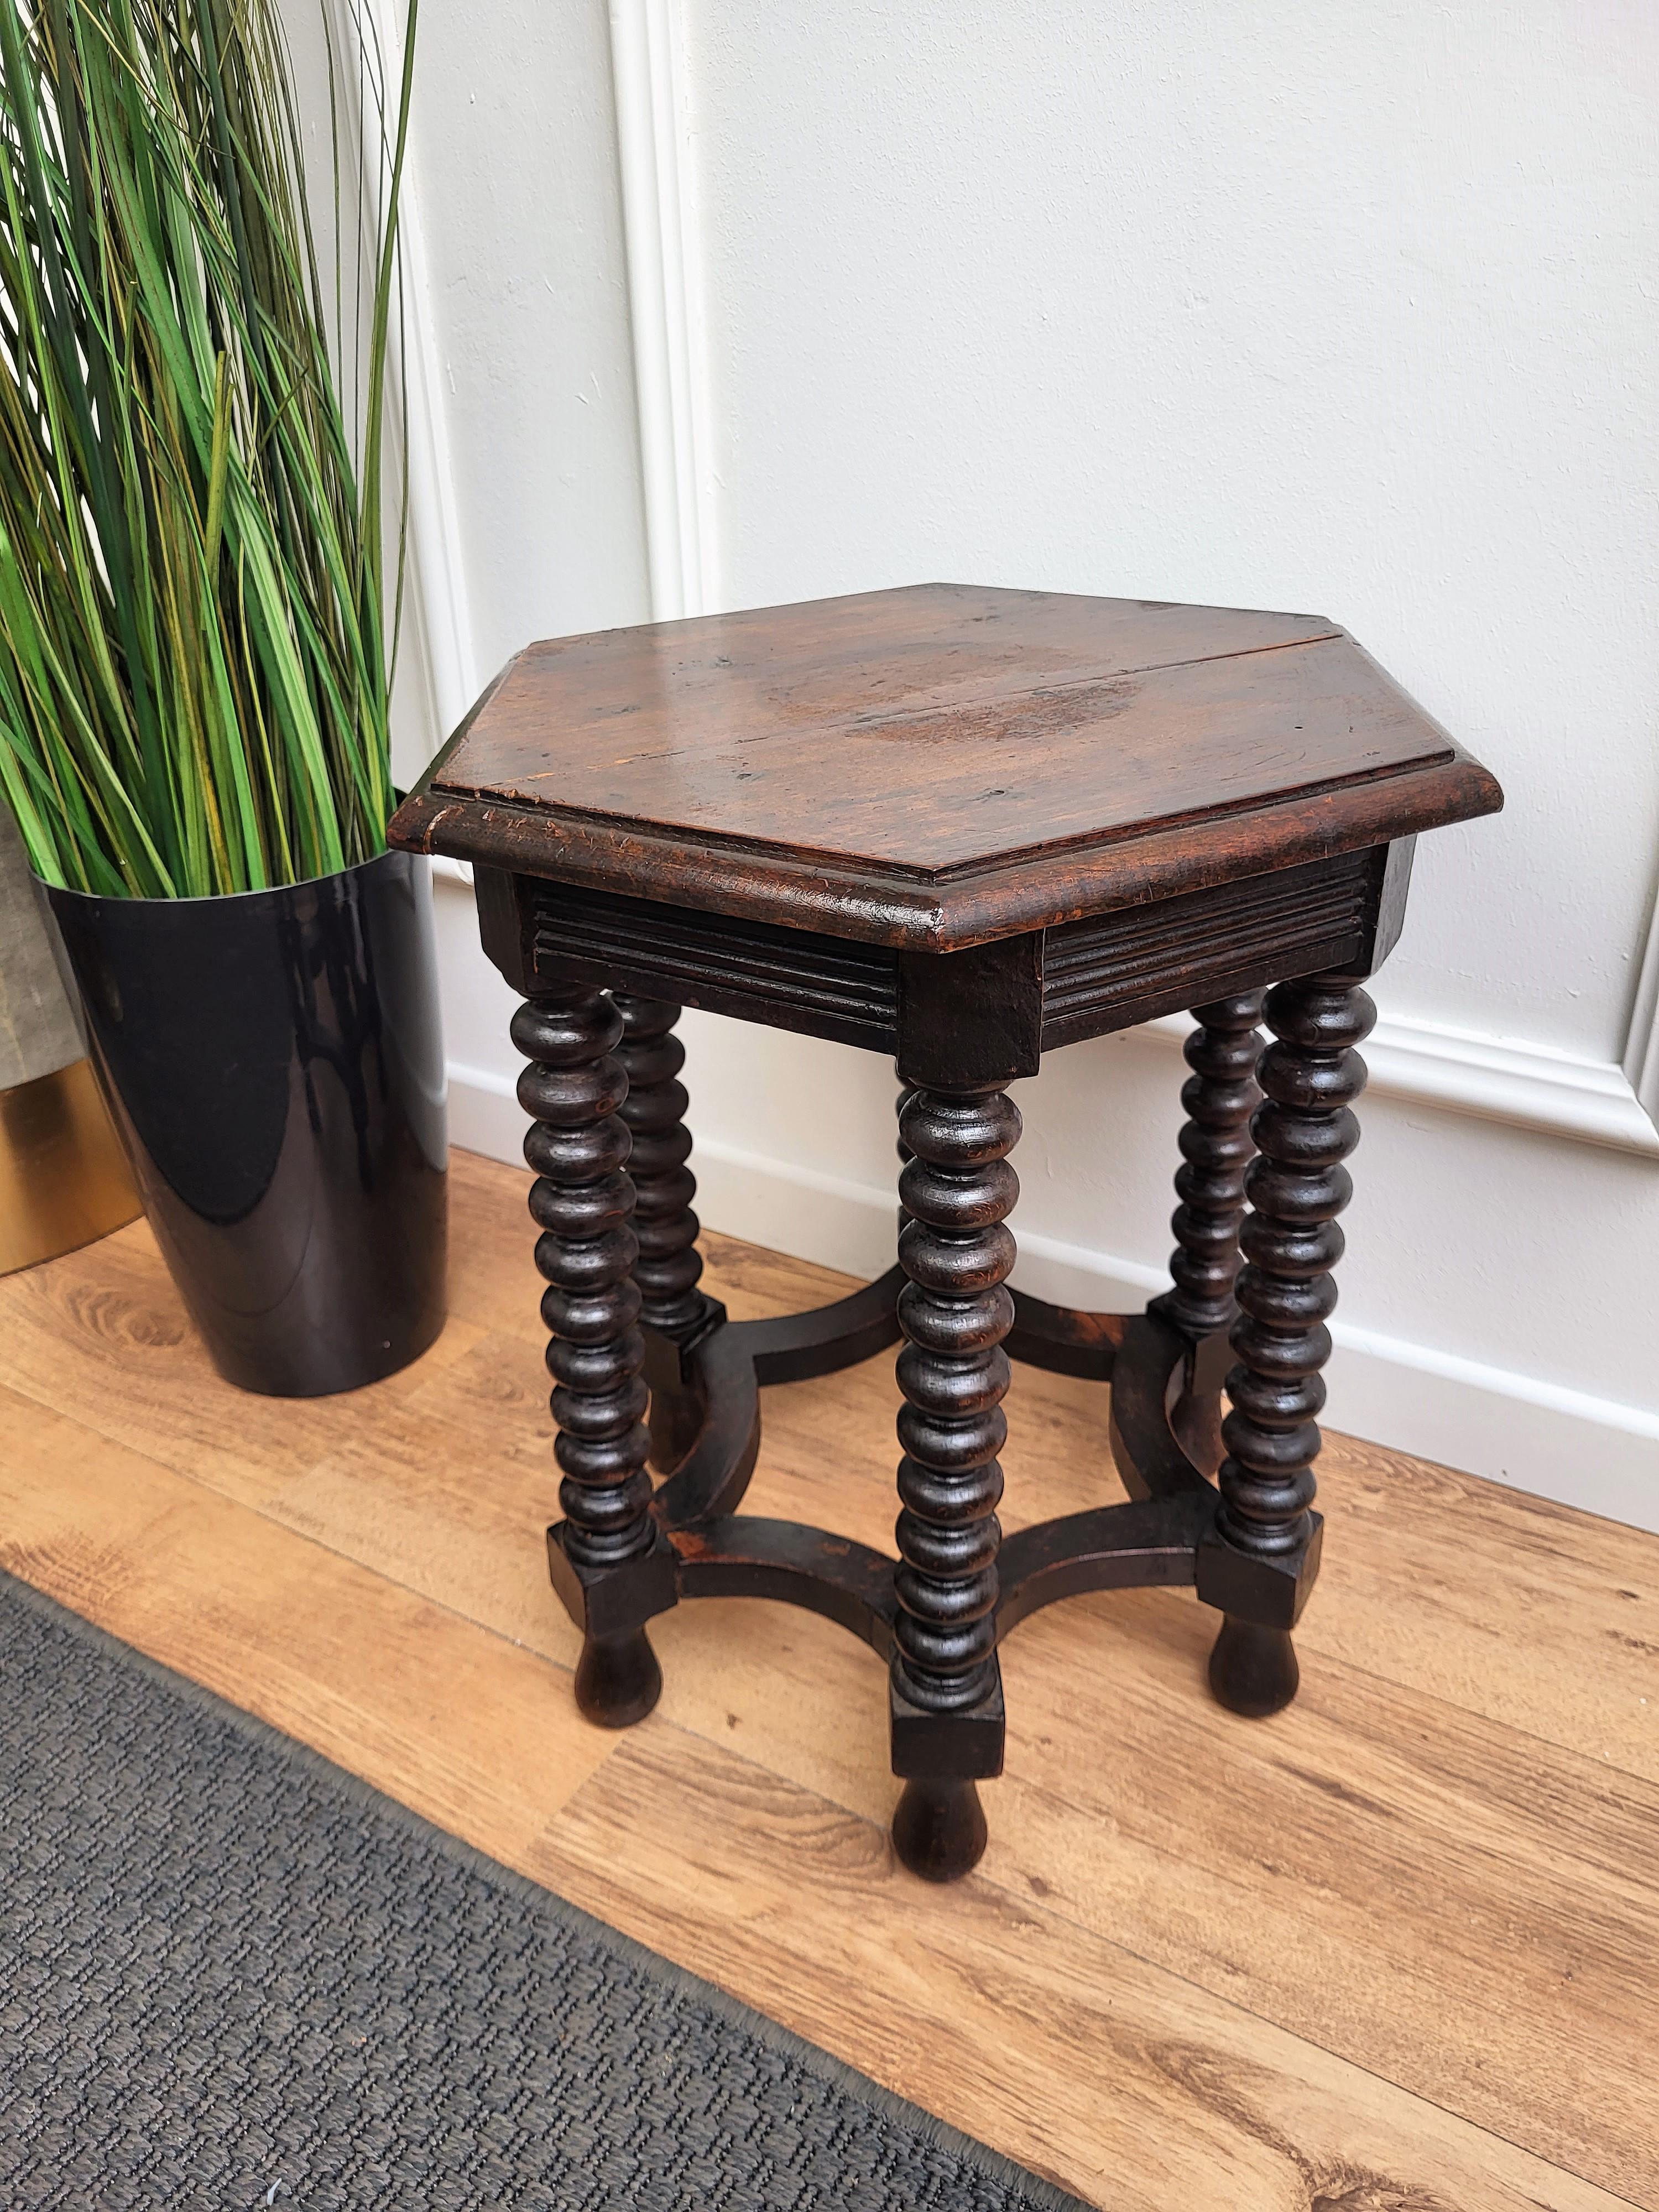 Beautiful antique Italian solid walnut side table or stool features hexagonal top with beveled edges over six beautifully bobbin turned legs, connected to one another with optogonal star shaped central stretcher. 
This Italian walnut stool or side